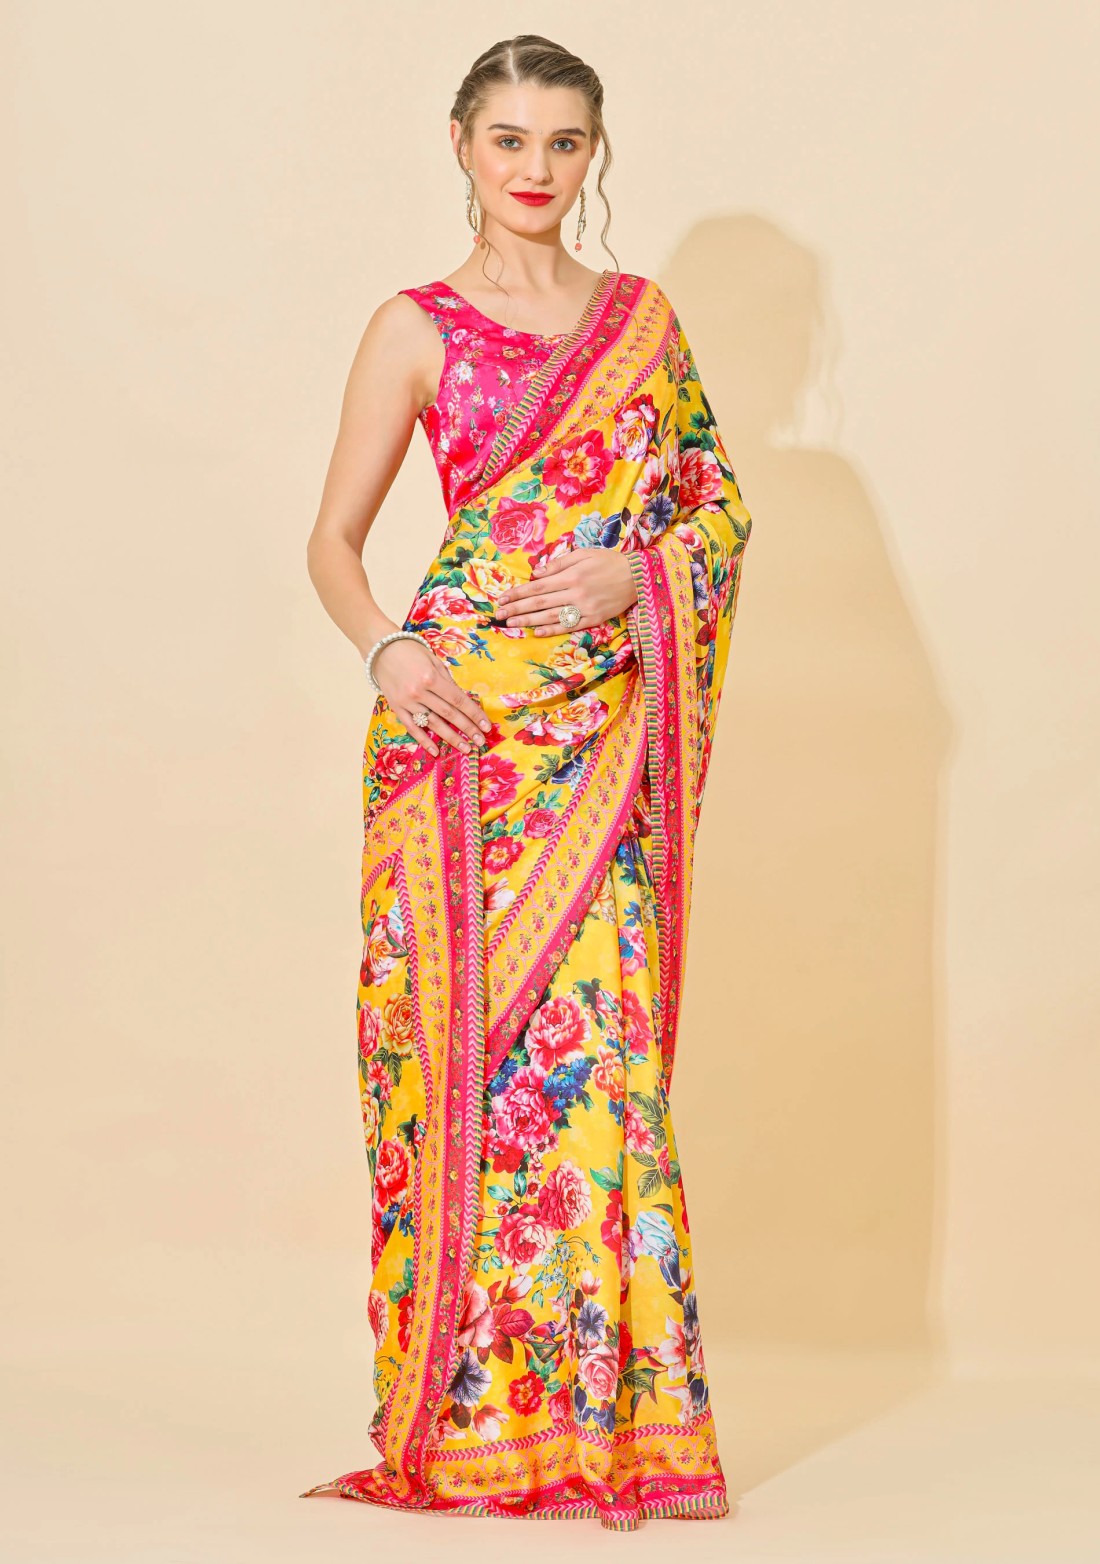 Yellow Floral Print Lightweight Satin Georgette Saree With Unstitched Blouse